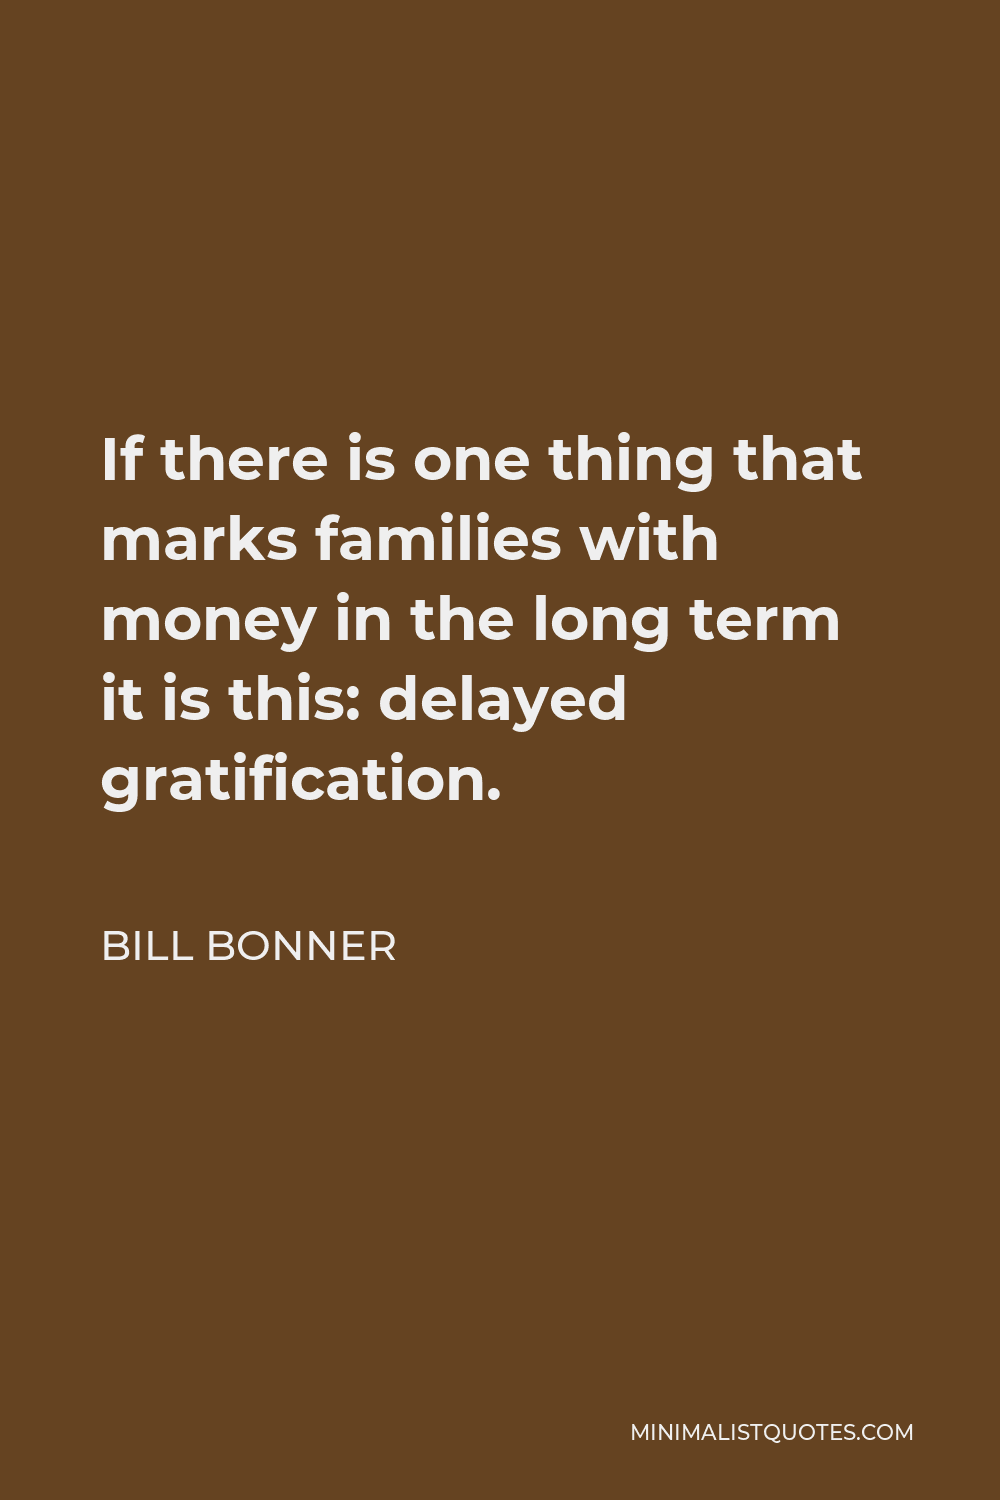 Bill Bonner Quote - If there is one thing that marks families with money in the long term it is this: delayed gratification.